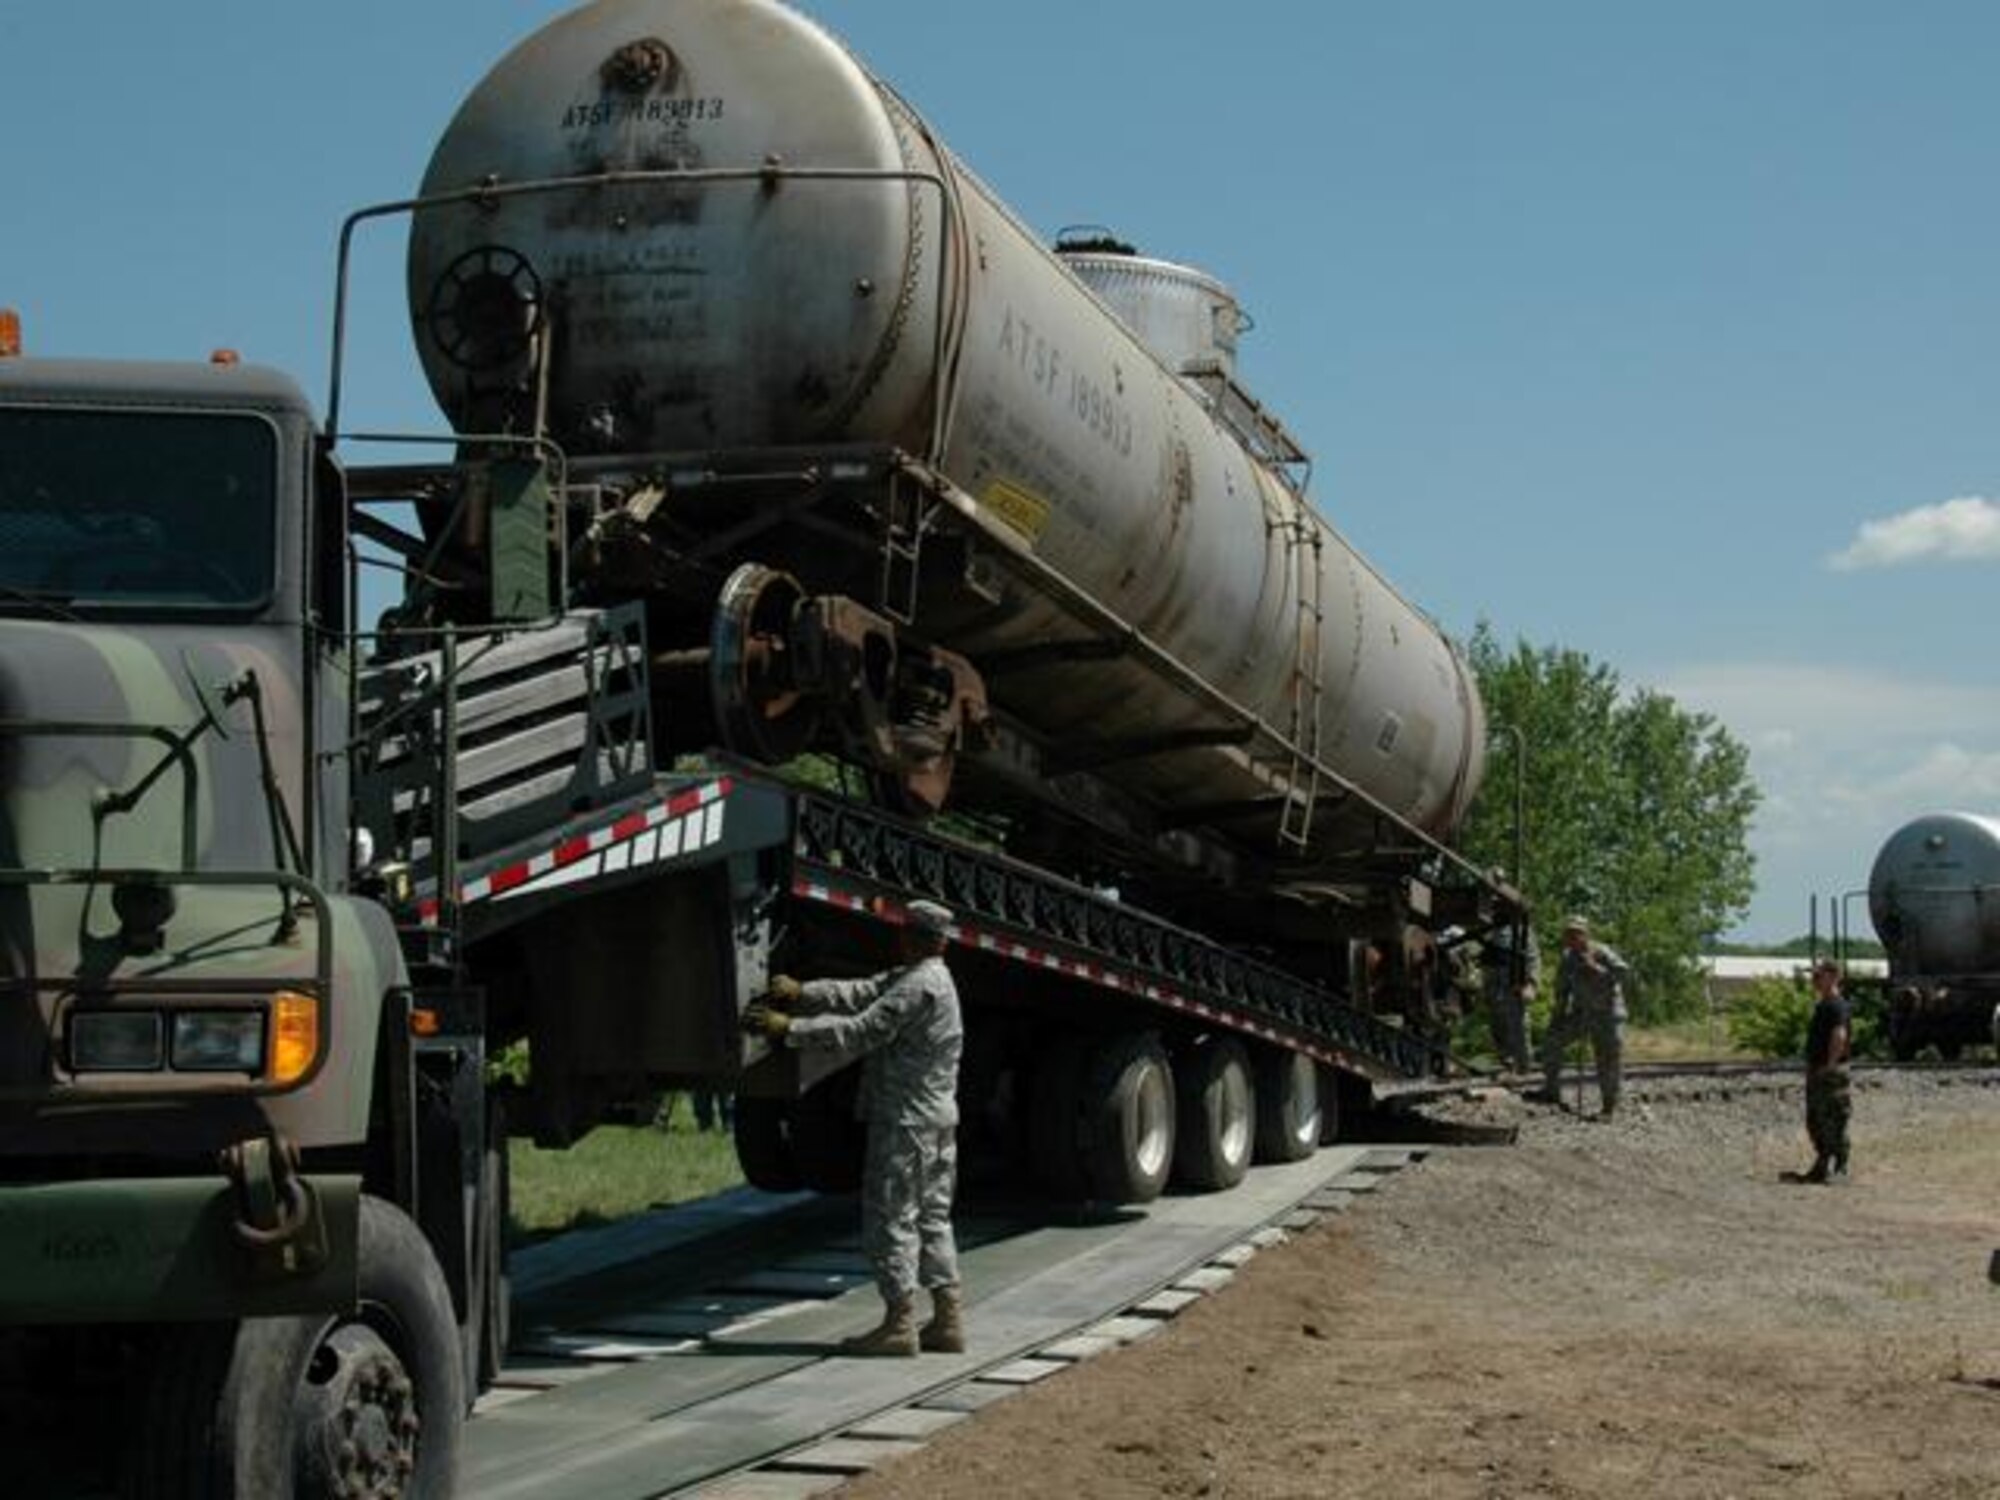 N.D. Air and Army National Guard members transfer a railcar from the Spur railroad track on the N.D. State University Campus in Fargo N.D. to a flatbed truck on Wed. Jul 9, 2008.  The two railcars, donated by Burlington Northern Santa Fe Railroad, will be used for training at the N.D. Air National Guard base.  